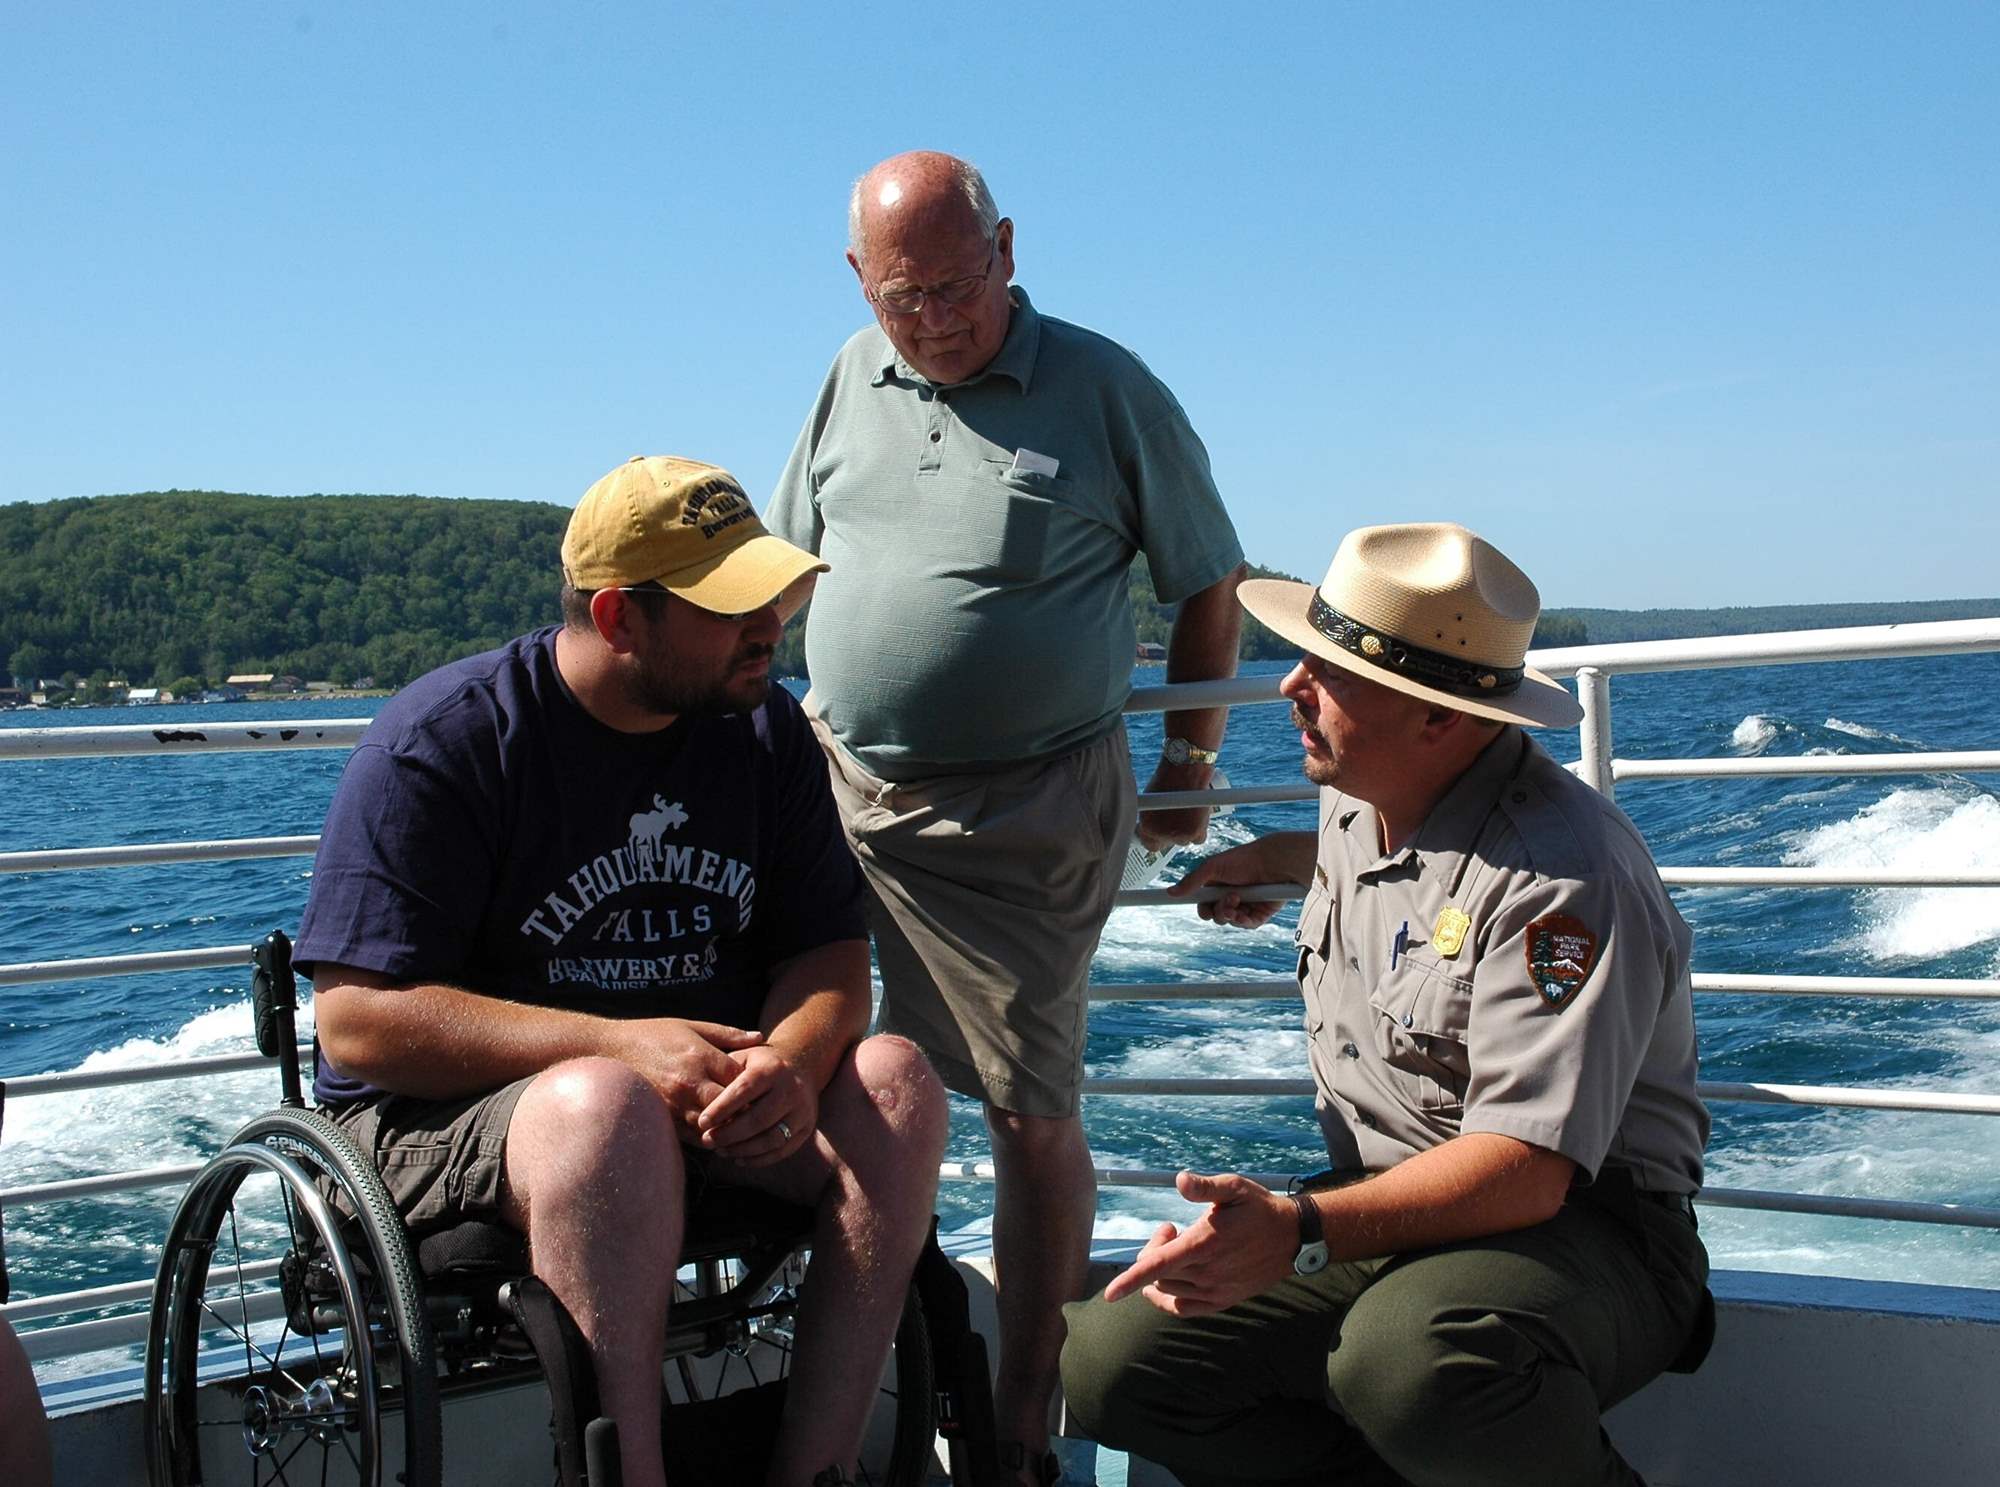 Man in NPS uniform with a shield-shaped badge and broad rim hat kneels on the deck of a boat talking to a man in wheelchair and a standing man.